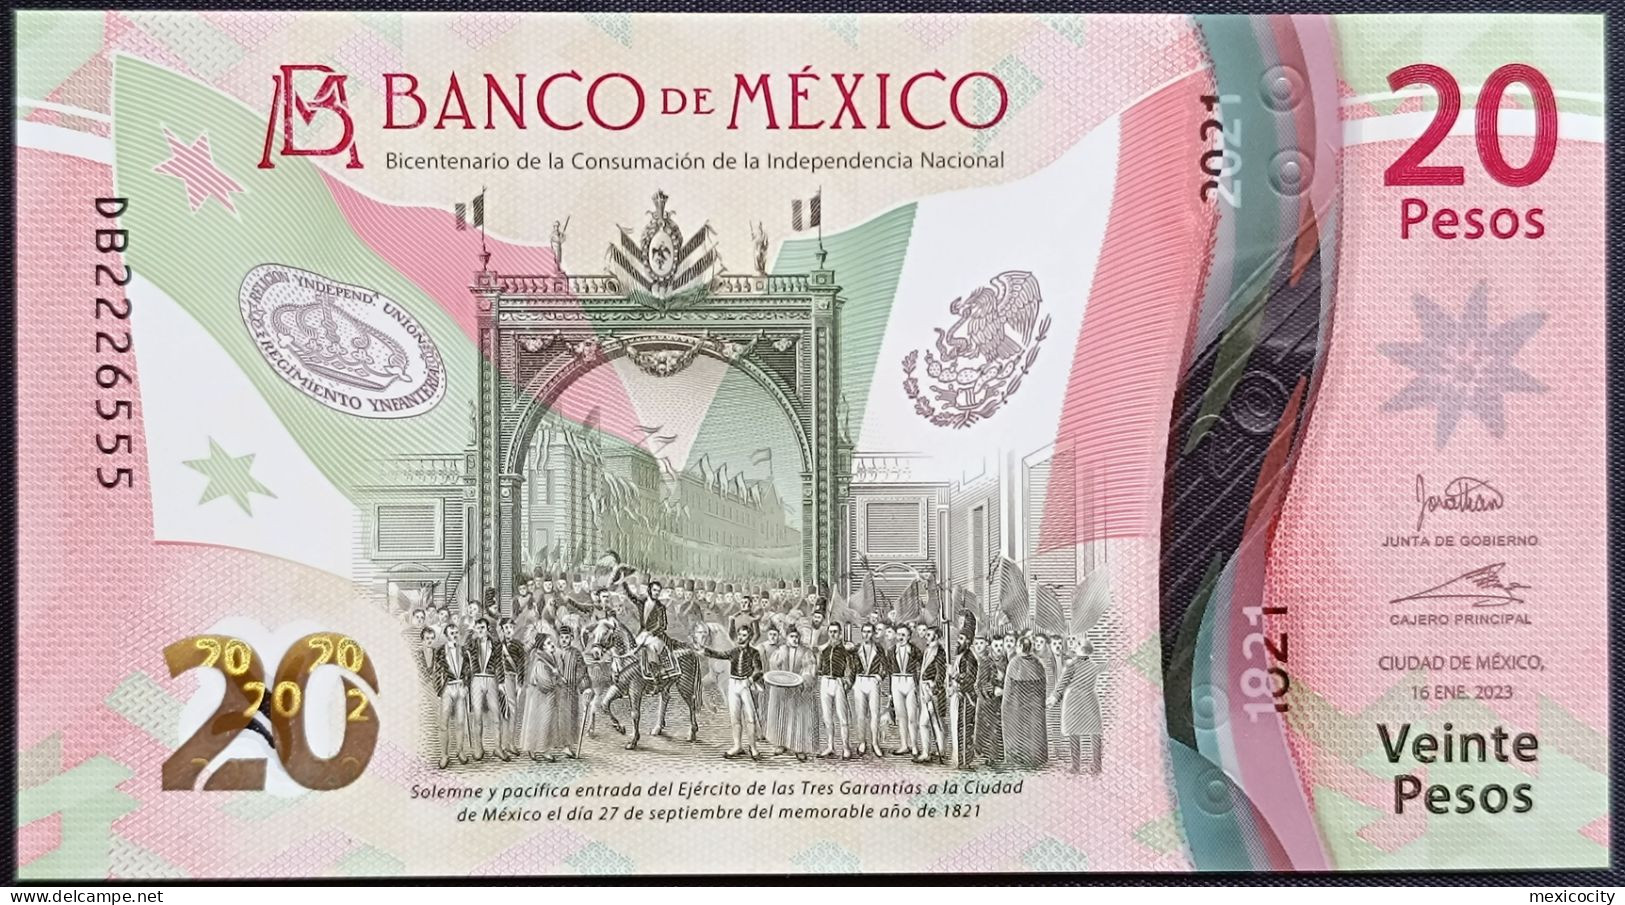 MEXICO $20 SERIES DB2226555 DOUBLE ANGEL # - 16-JAN-2023 INDEPENDENCE POLYMER NOTE BU Mint Crisp - Mexico